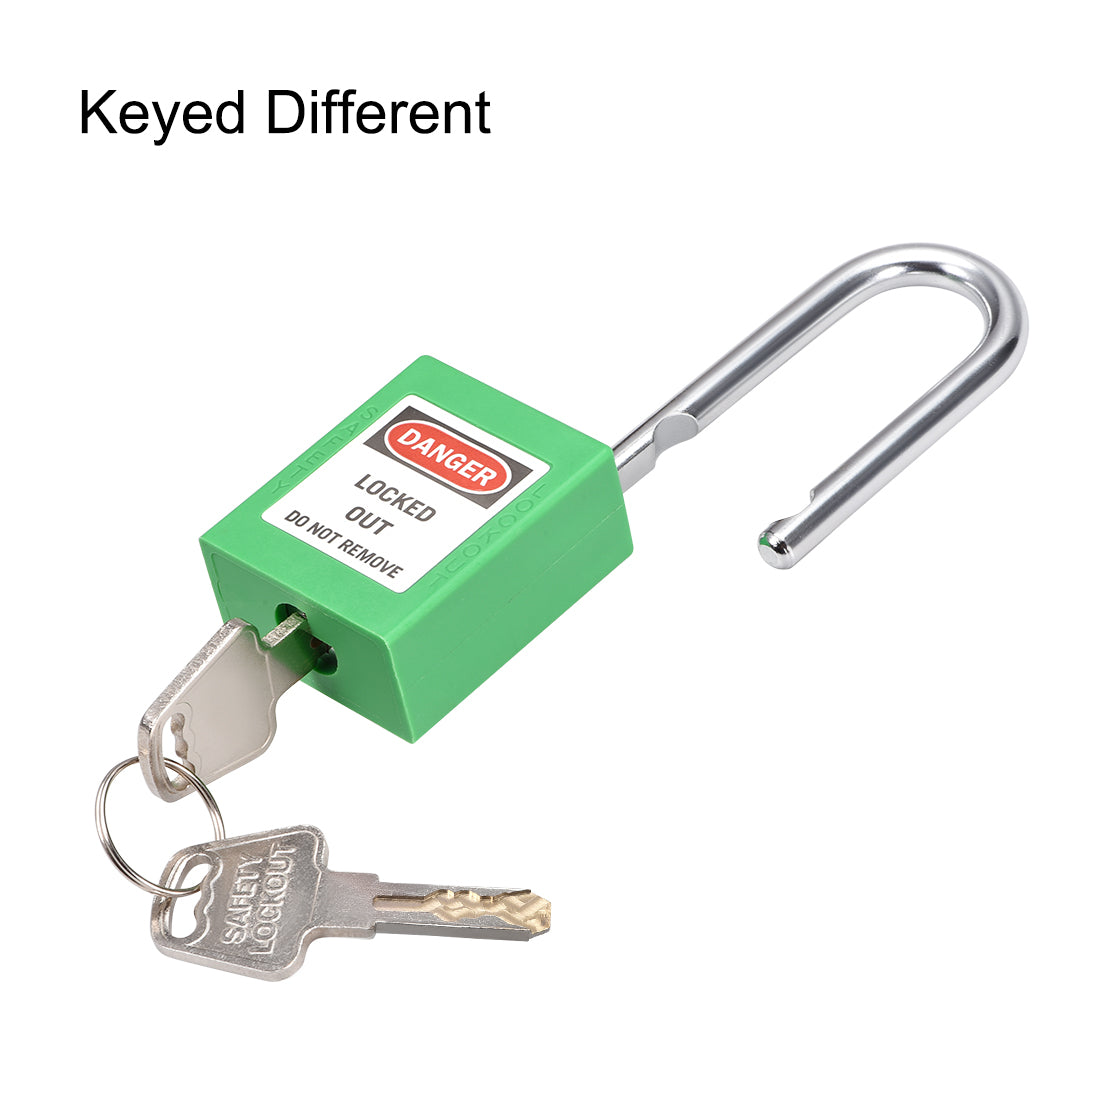 uxcell Uxcell Lockout Tagout Safety Padlock 38mm Steel Shackle Keyed Different Light Green